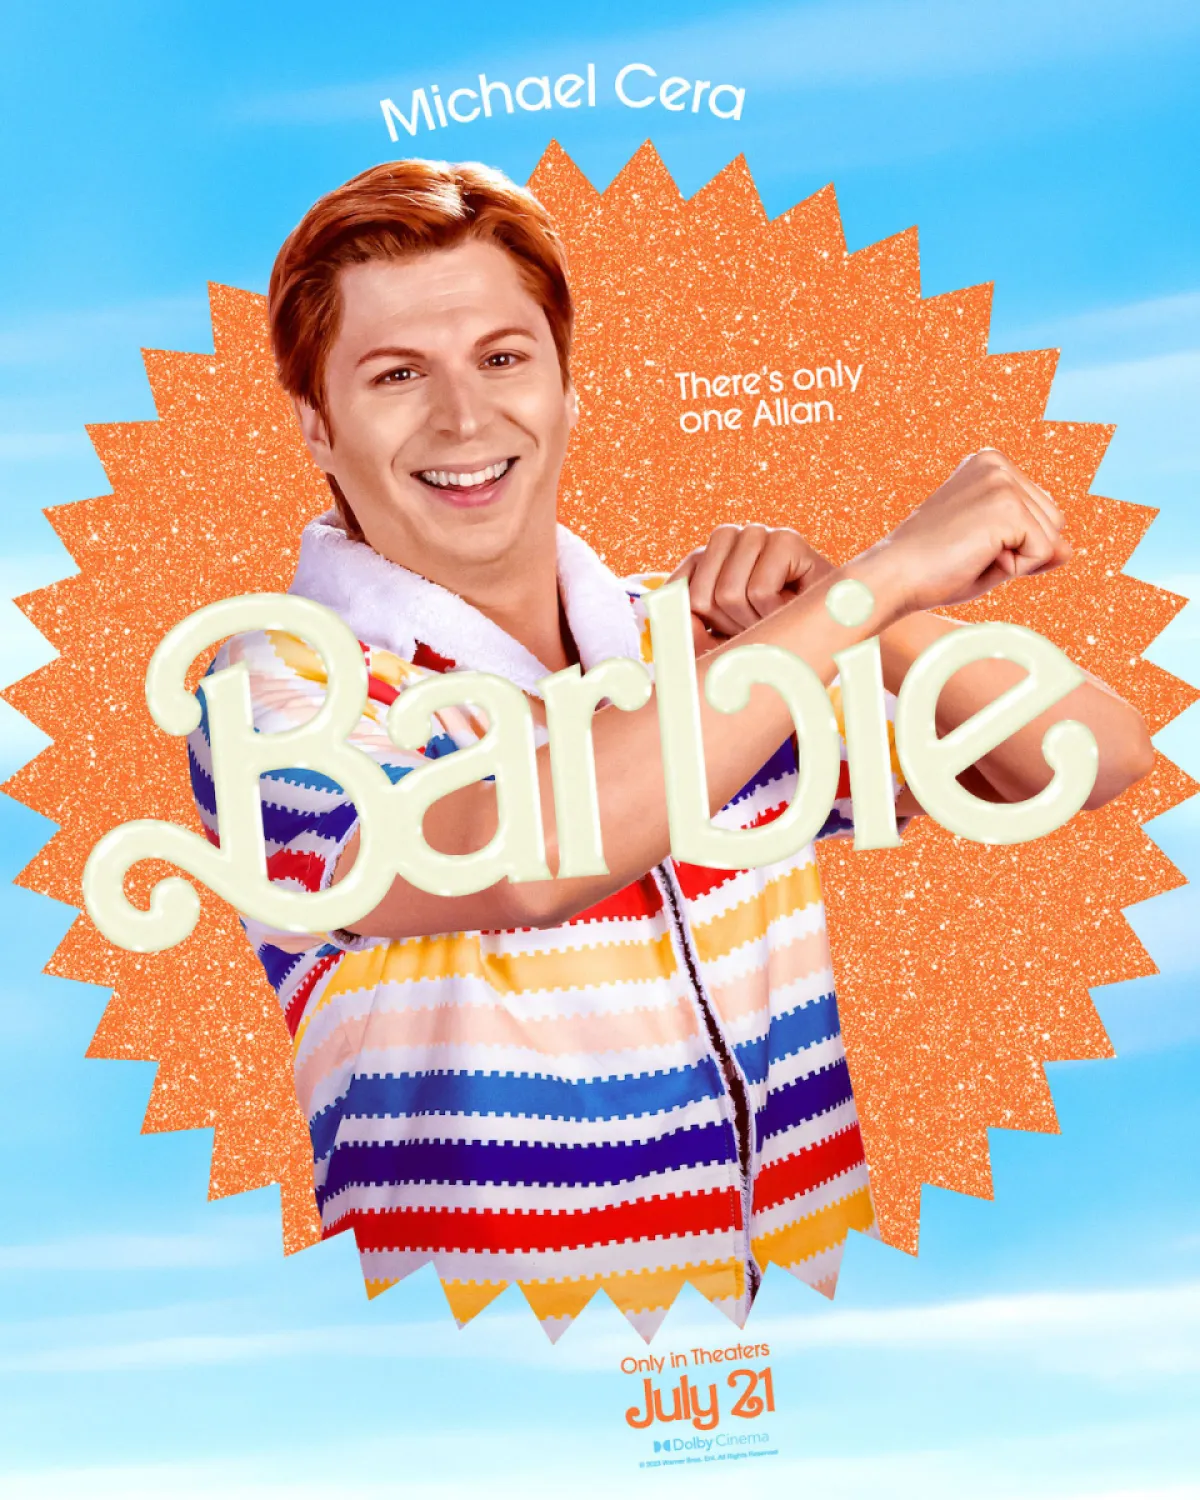 A Barbie character poster featuring Michael Cera as Allan.